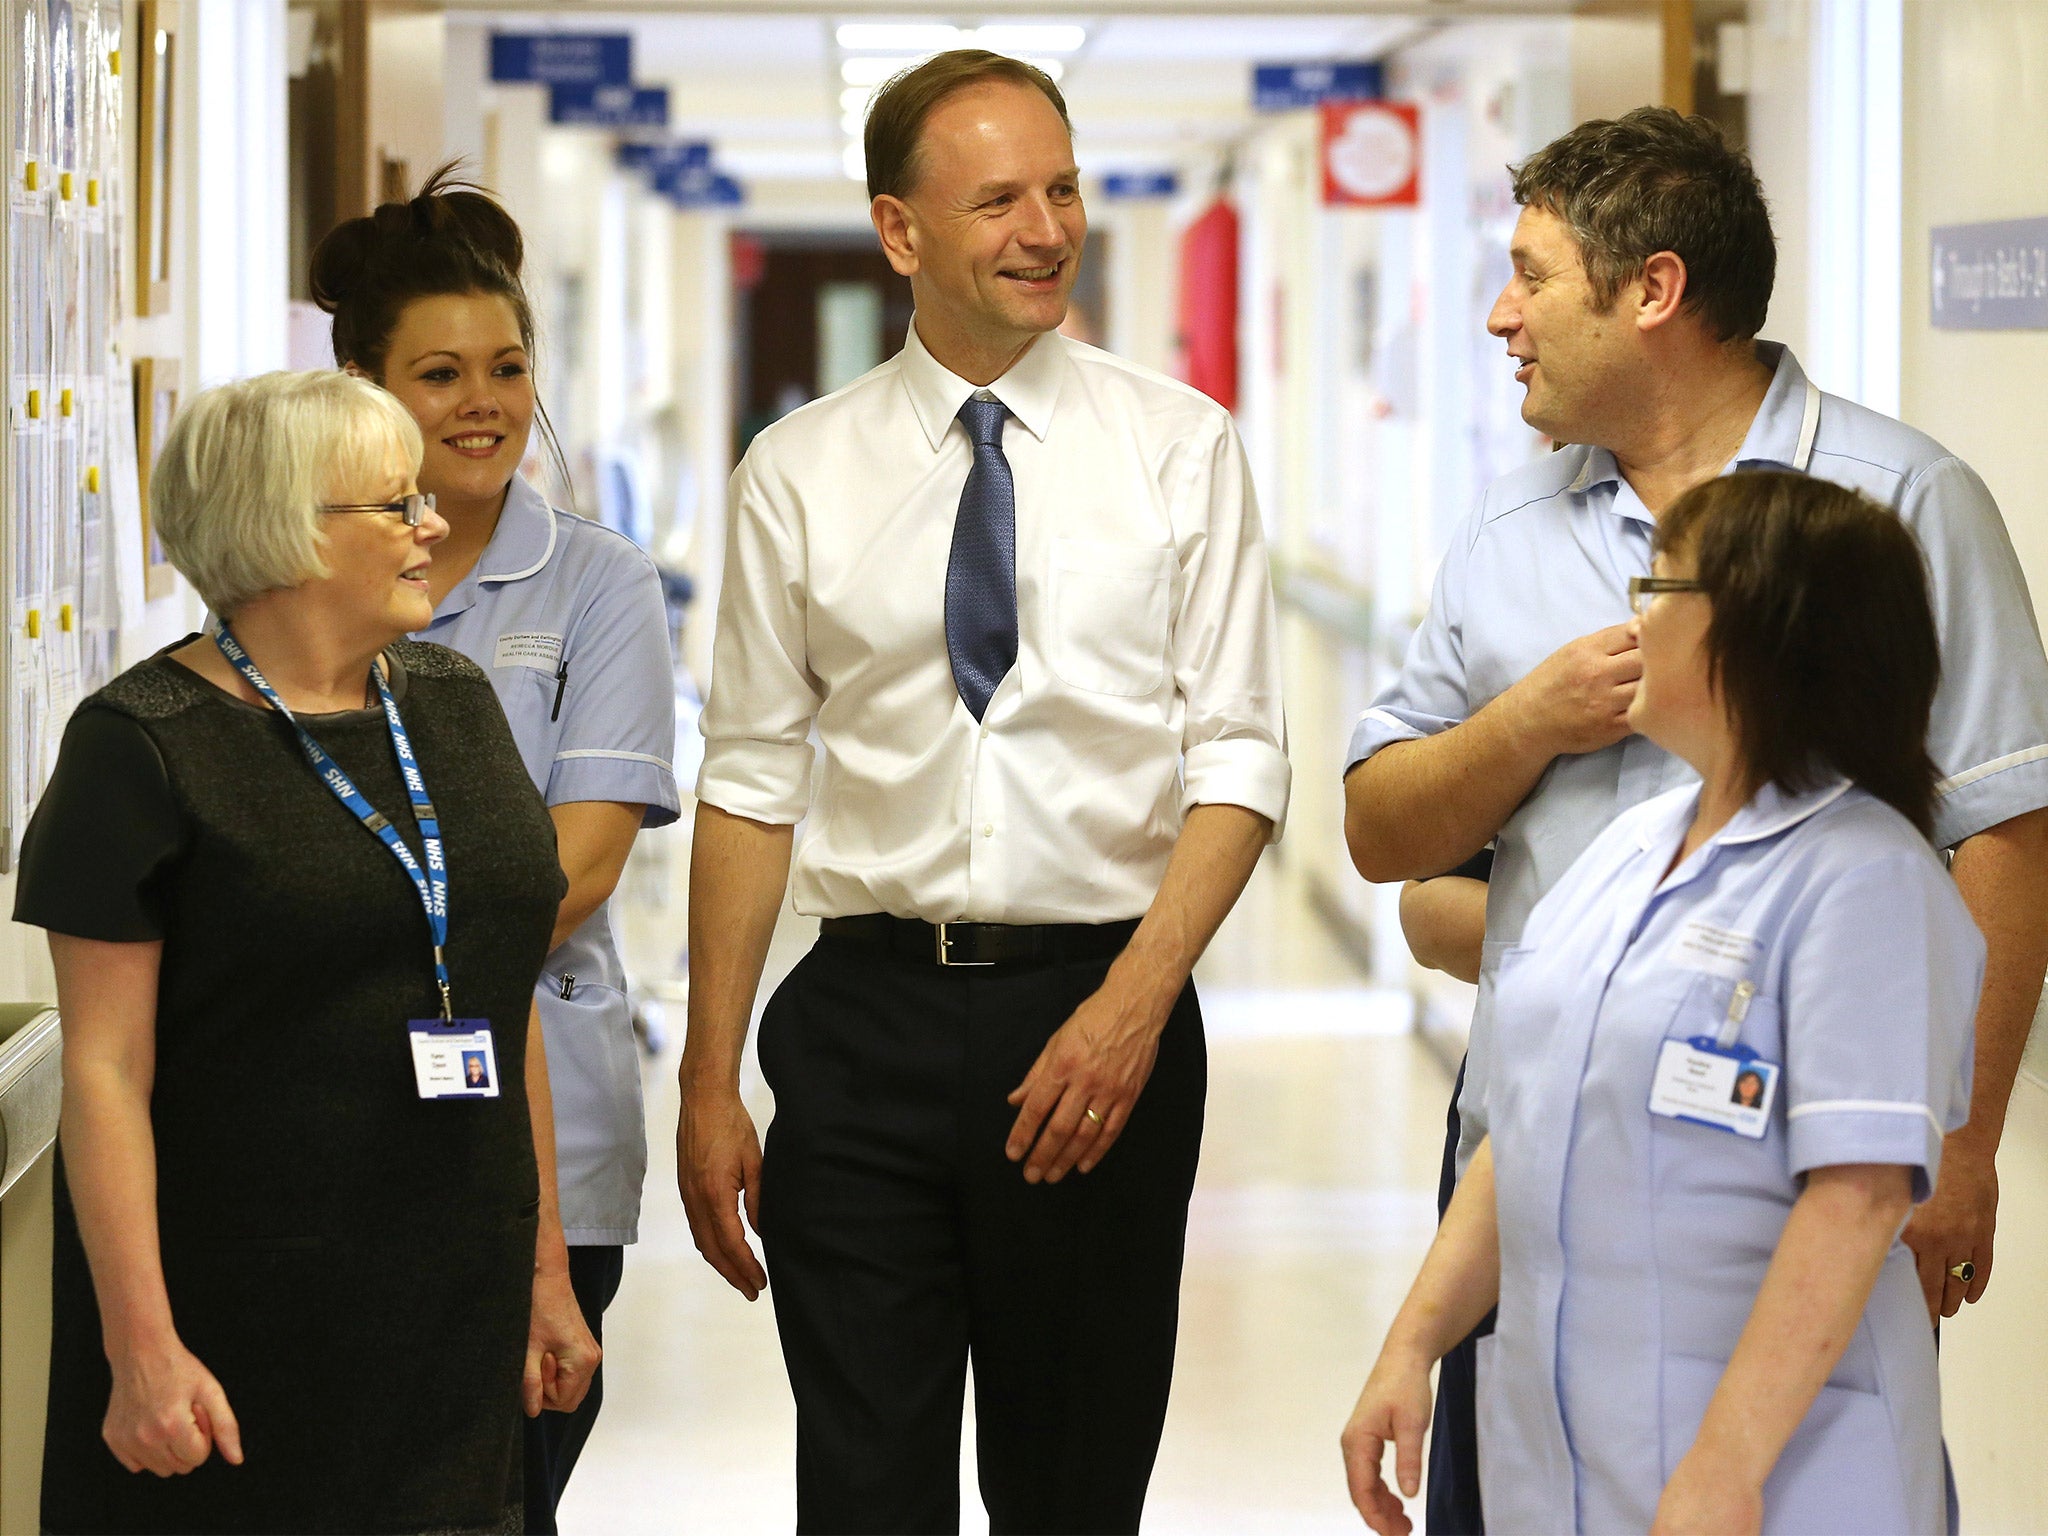 NHS England chief executive Simon Stevens visits Consett Medical Centre in County Durham